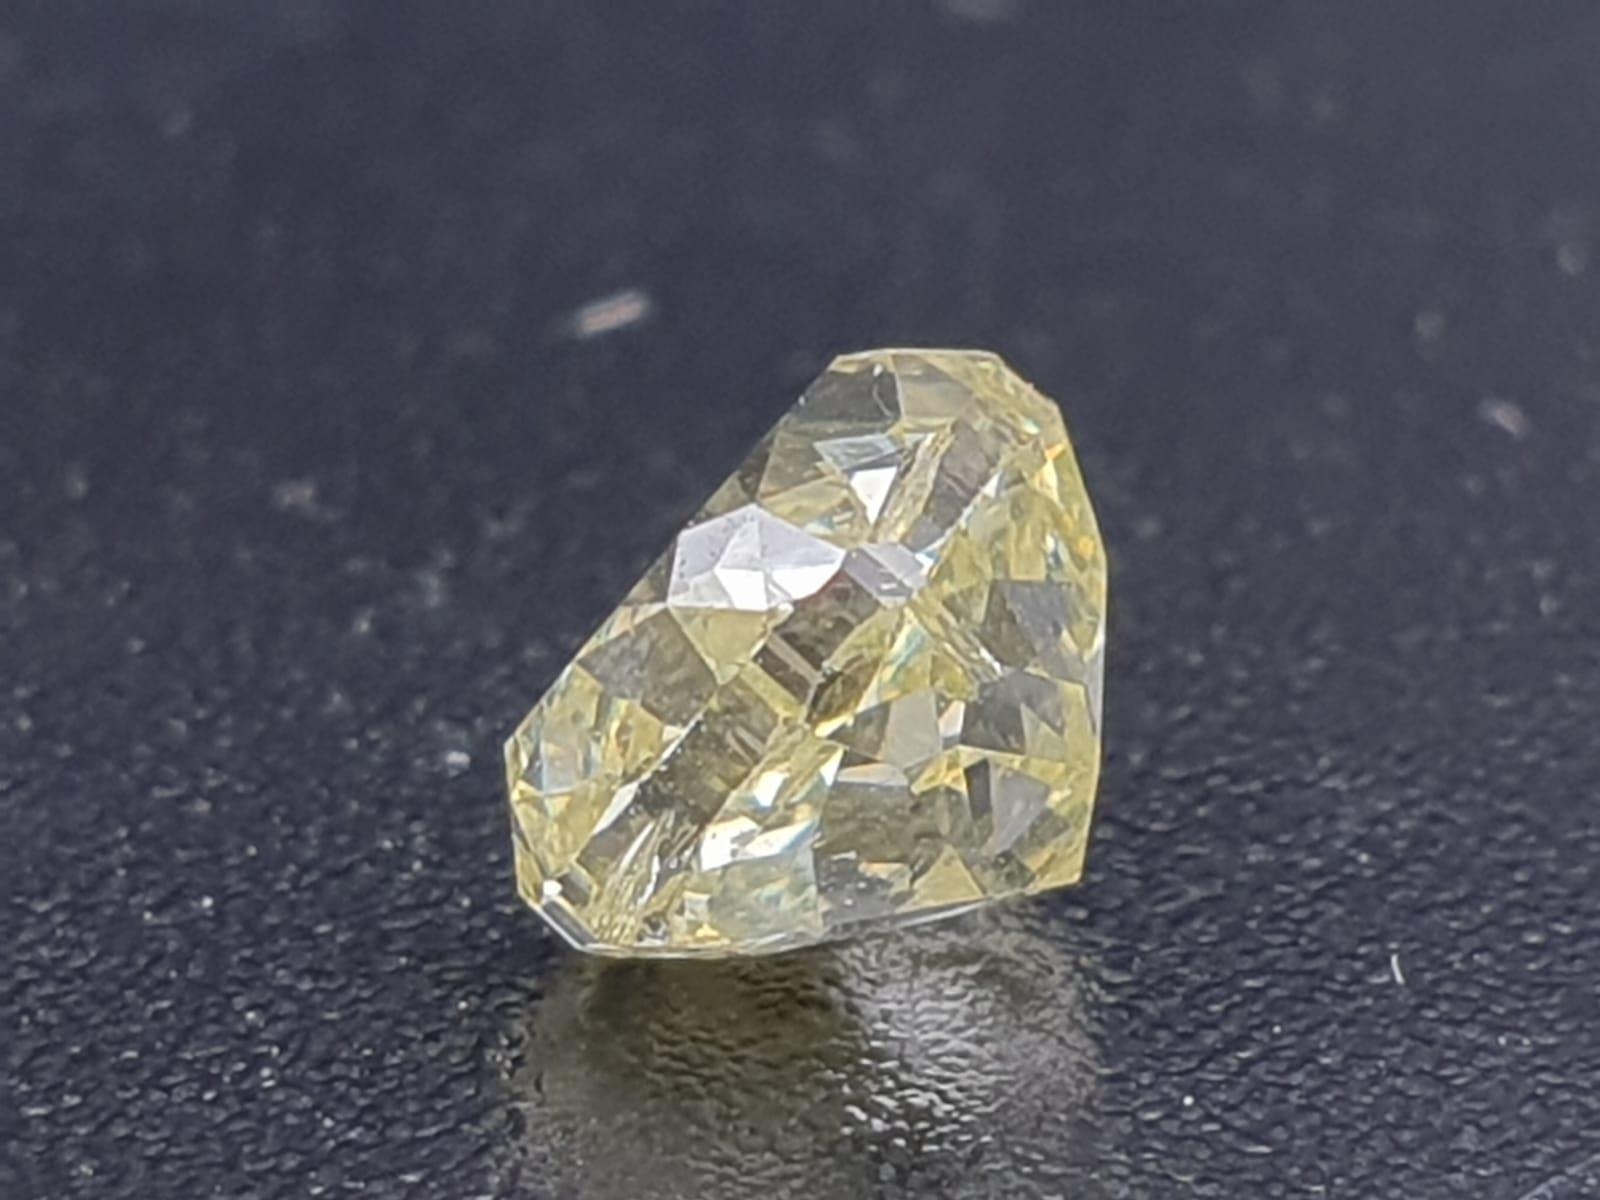 LOOSE DIAMOND CUSHION MODIFIED BRILIANT GIA 2135500807 1CT NATURAL FANCY YELLOW EVEN DISTRIBUTION - Image 2 of 6